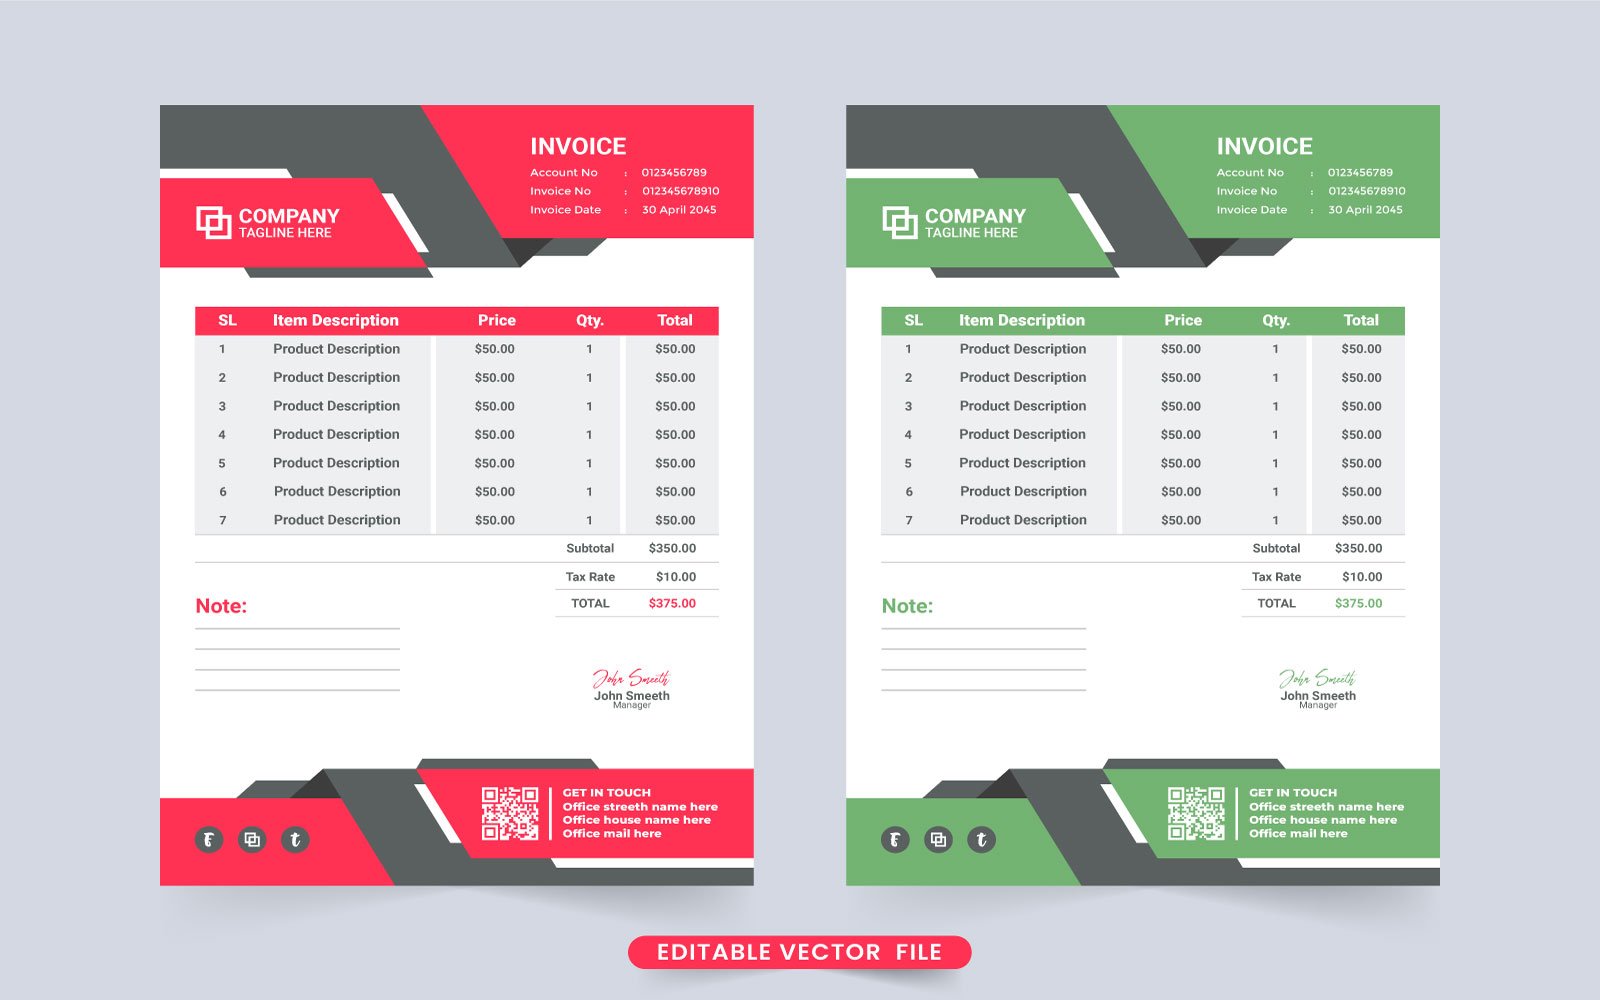 Template #272347 Invoice Template Webdesign Template - Logo template Preview